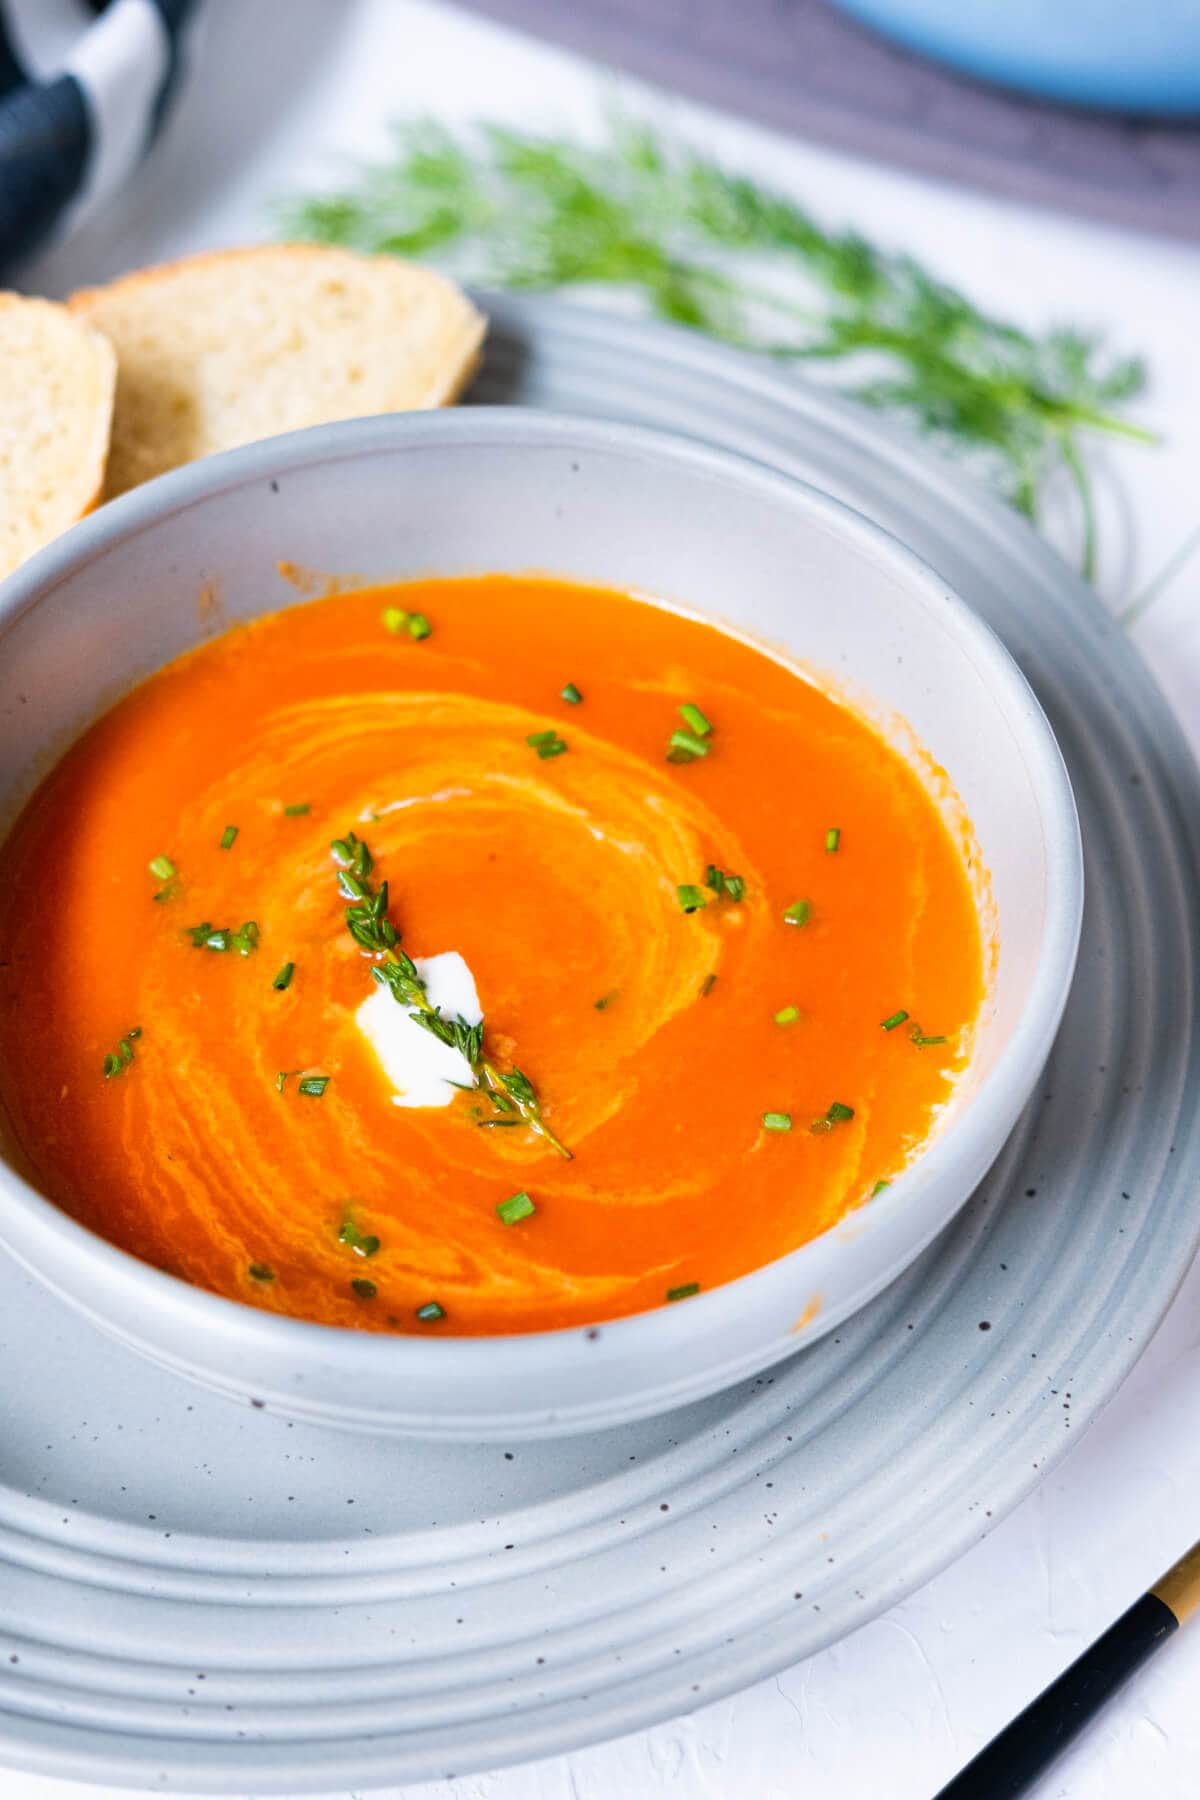 Classic tomato soup served with French bread on the side.